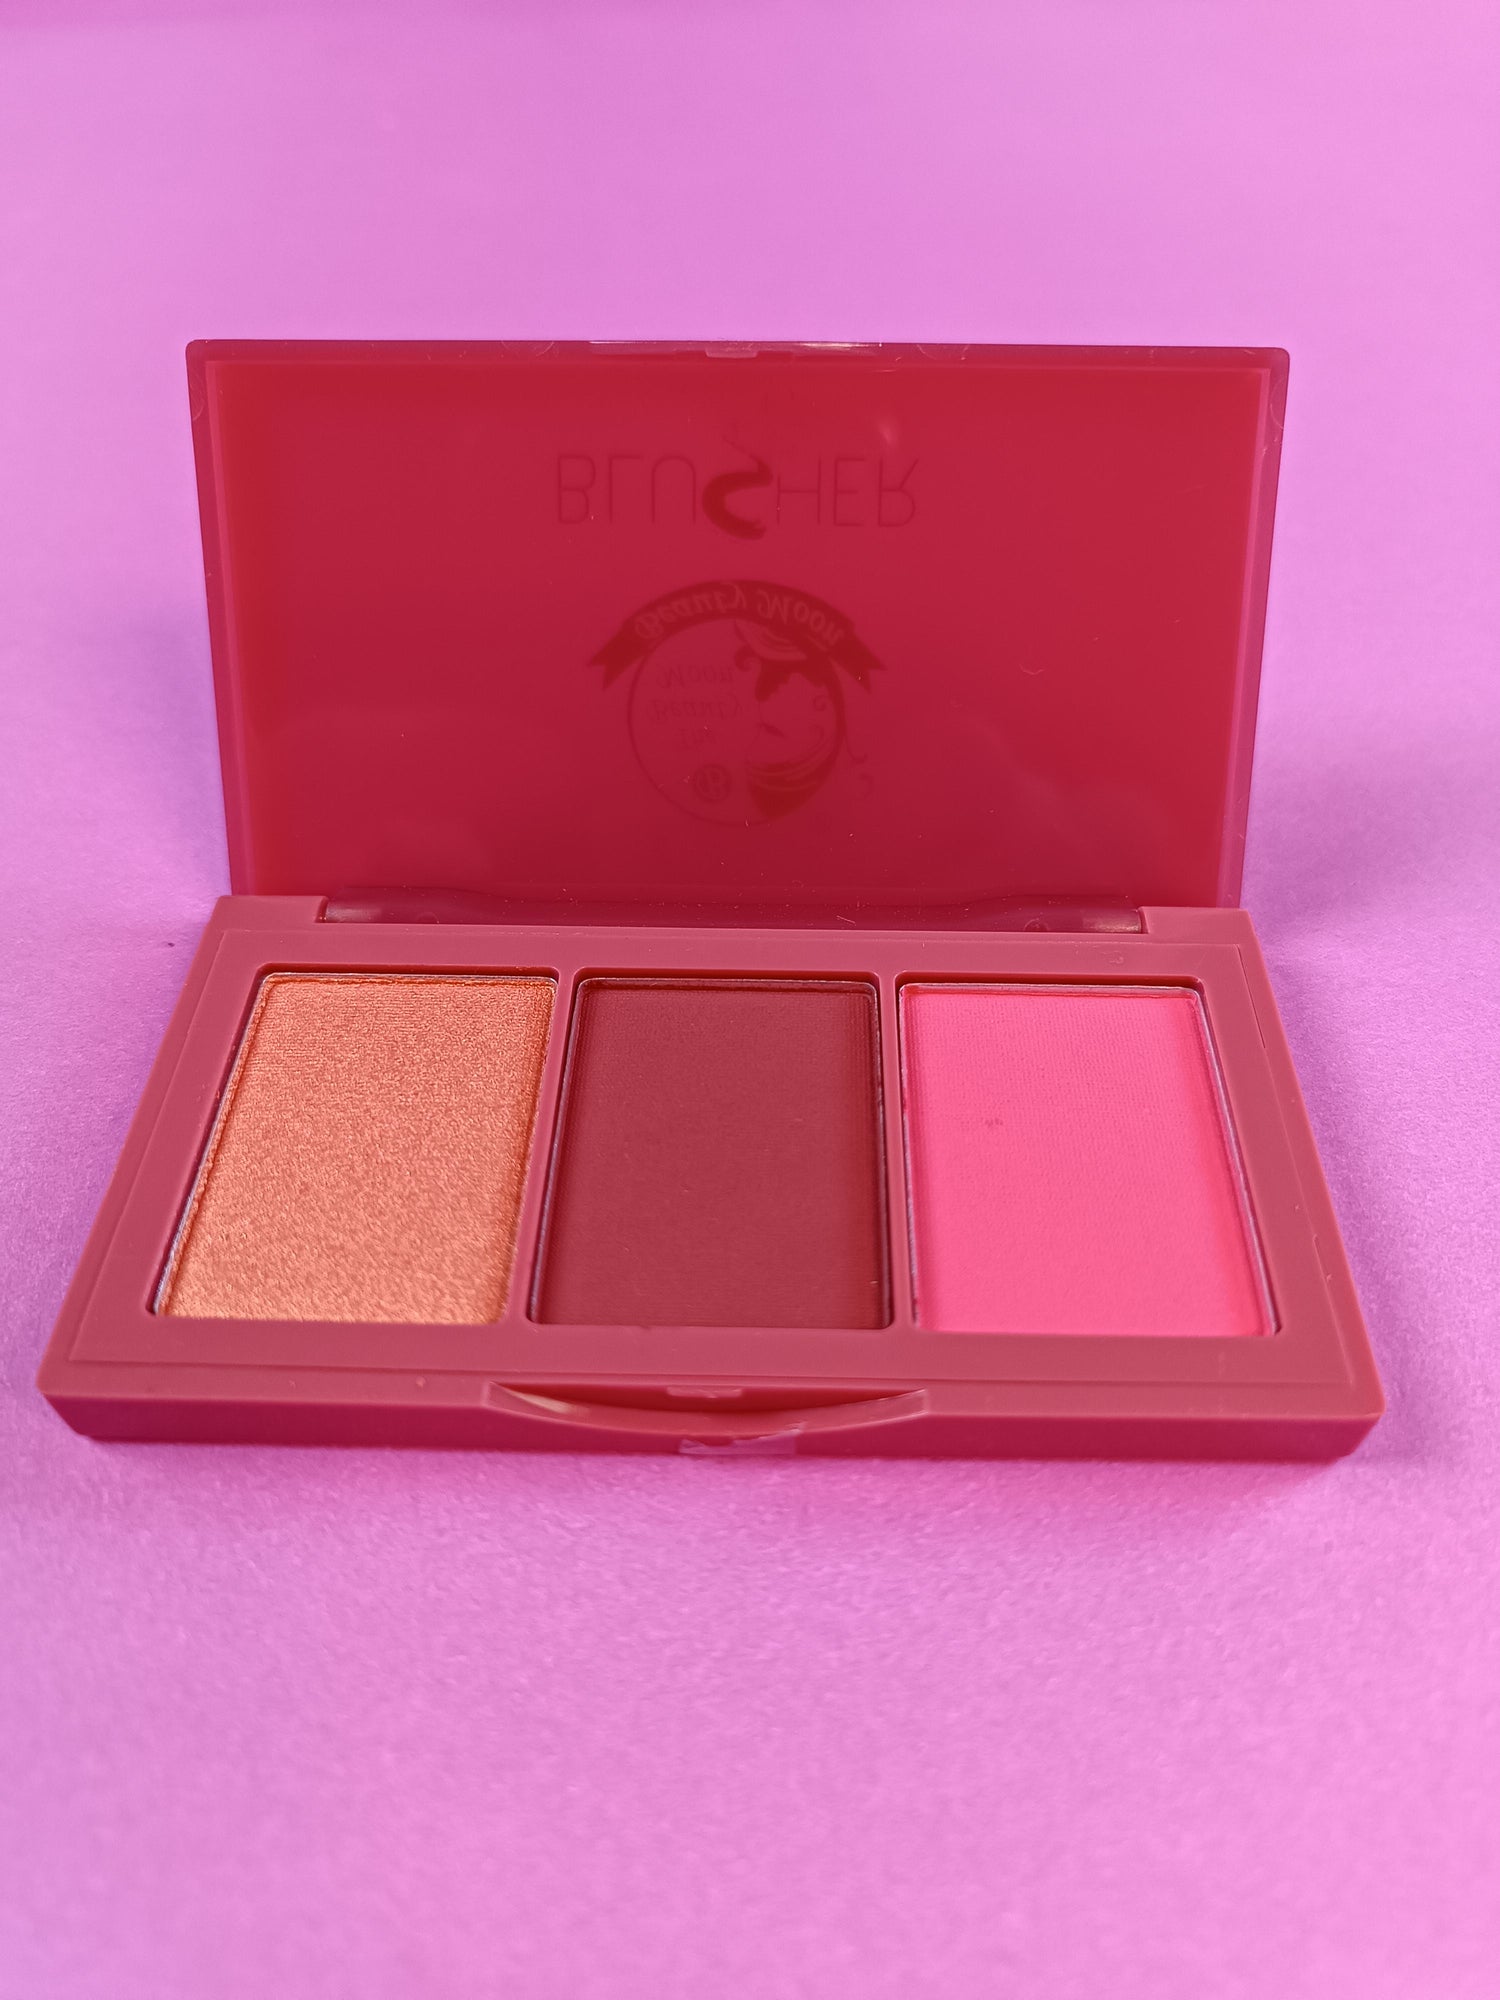 The Beauty Moon Trio Blusher